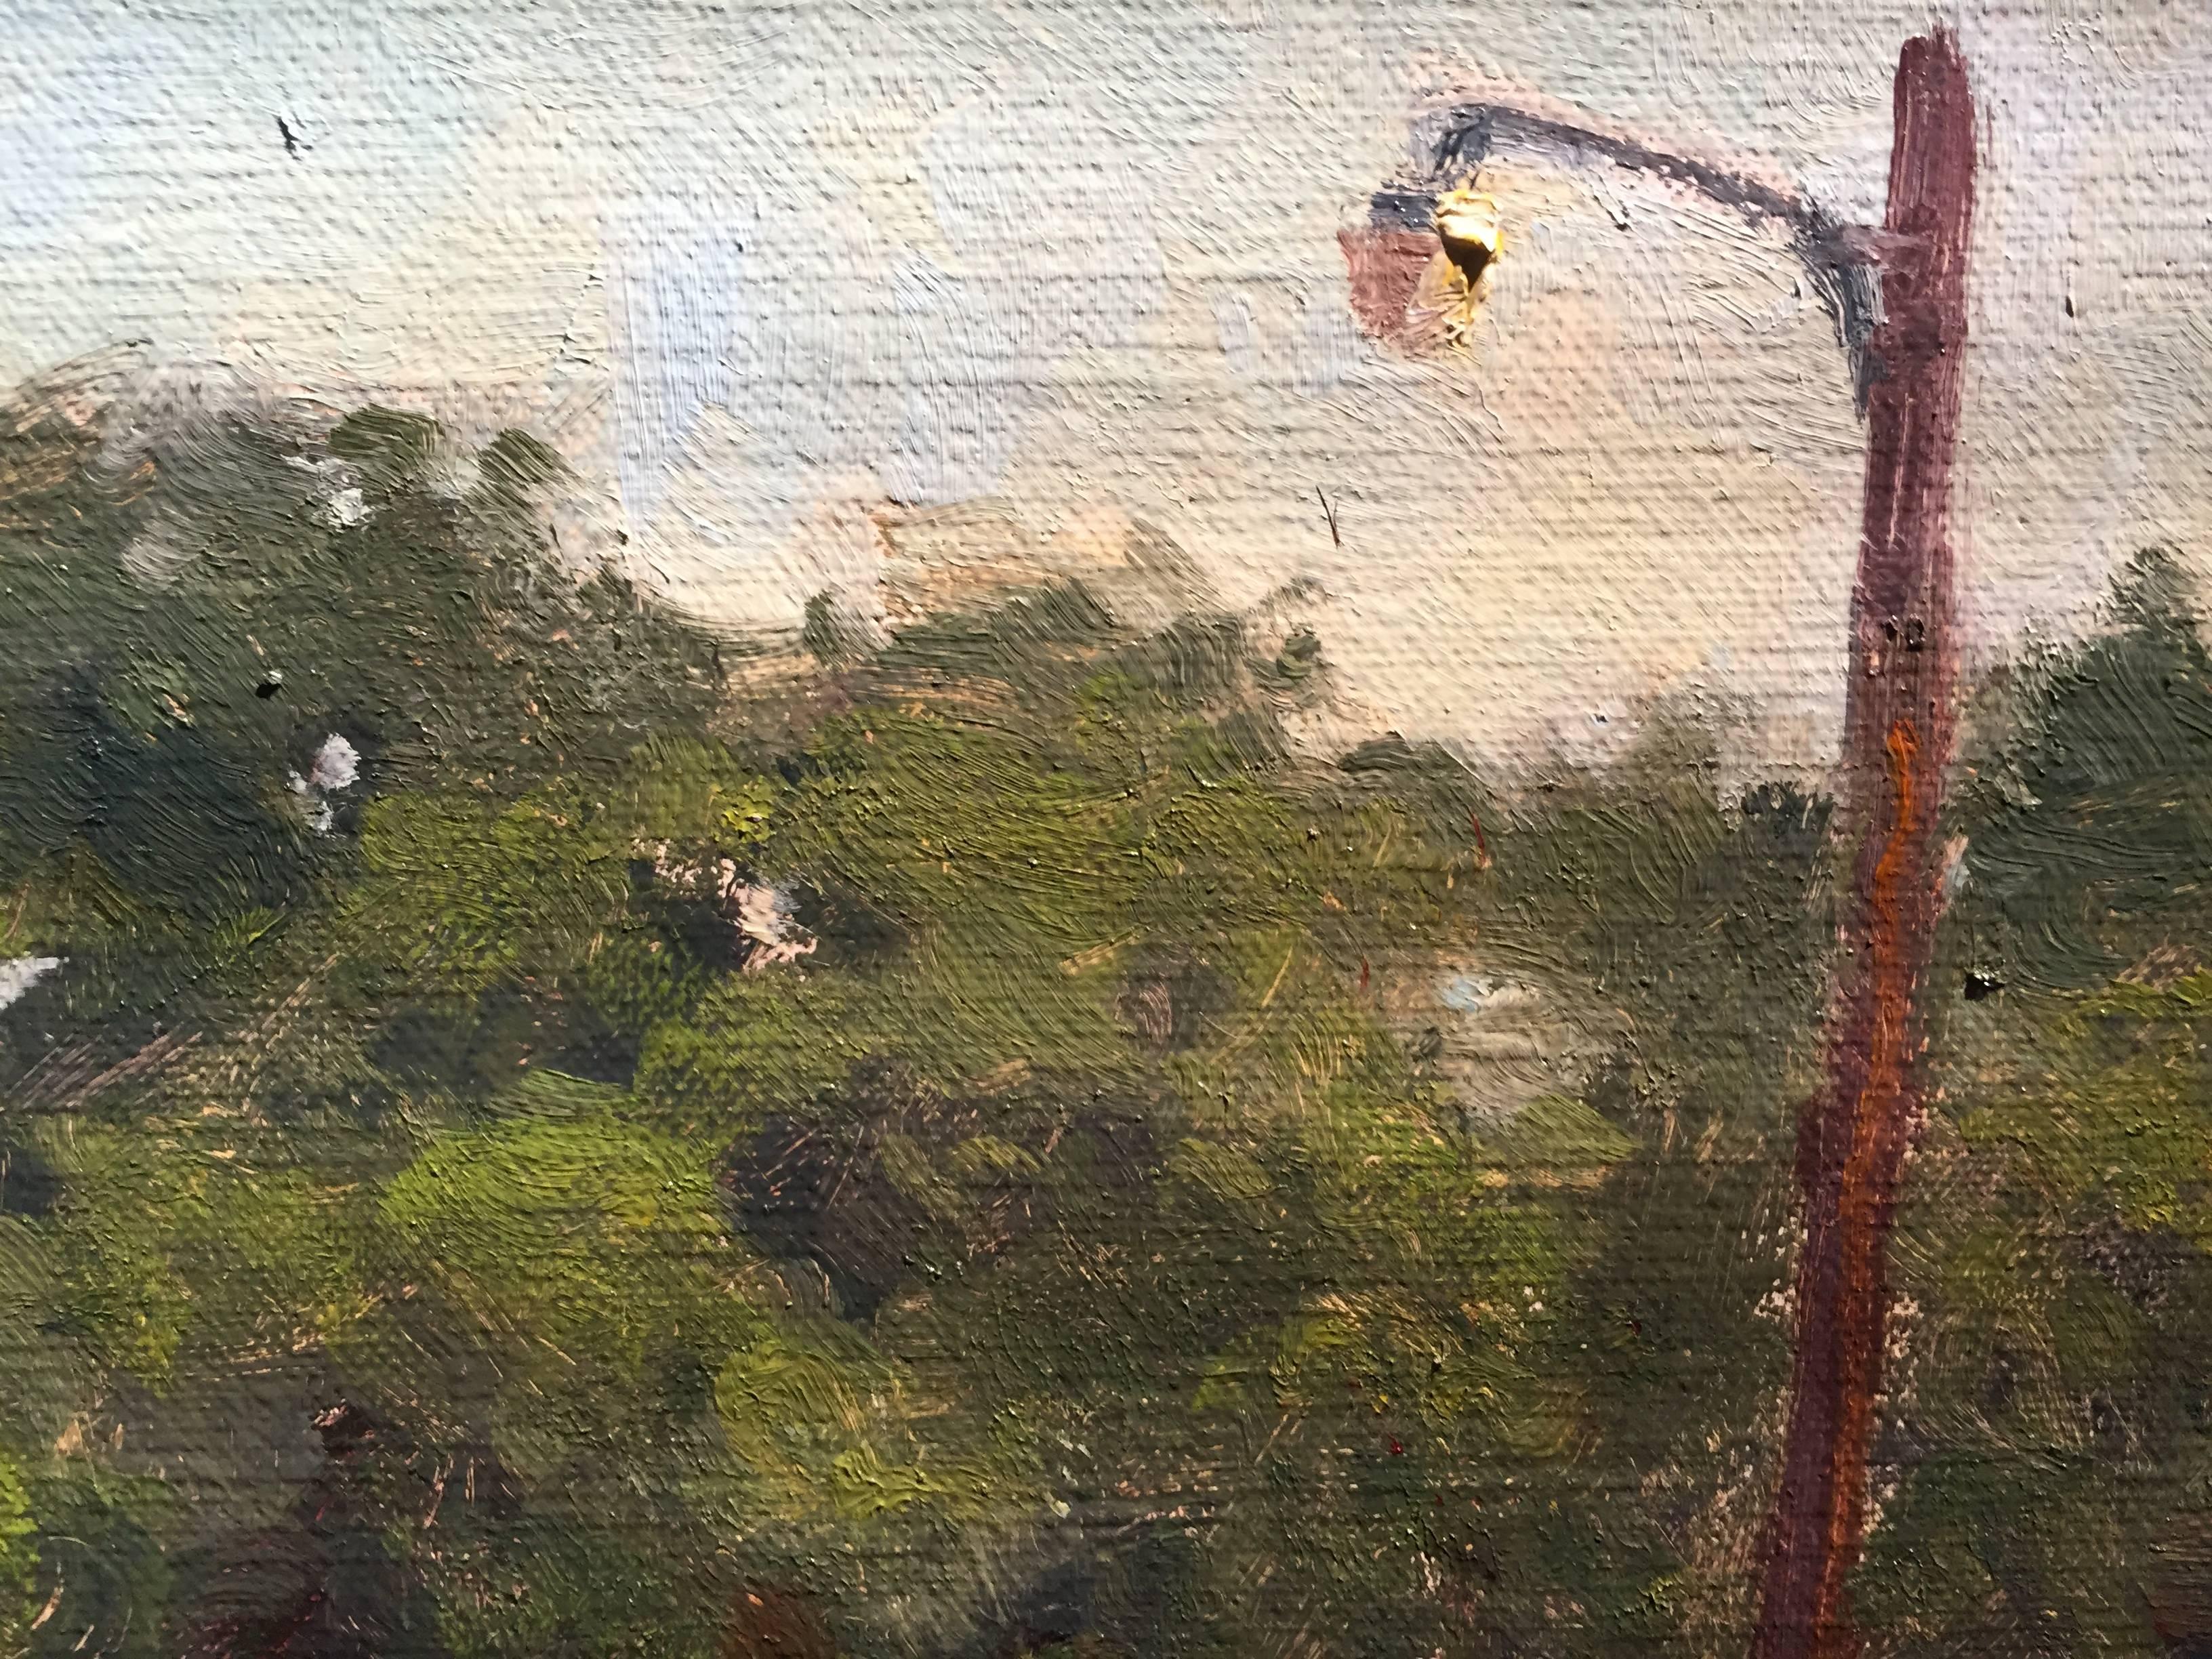 Backyard Chickens was painted en plein air in rural america. Two small ranch buildings compose the border of the painting. The horizon is made up of trees in full bloom. The atmosphere fades from a yellow horizon into a deep blue expanse of sky.